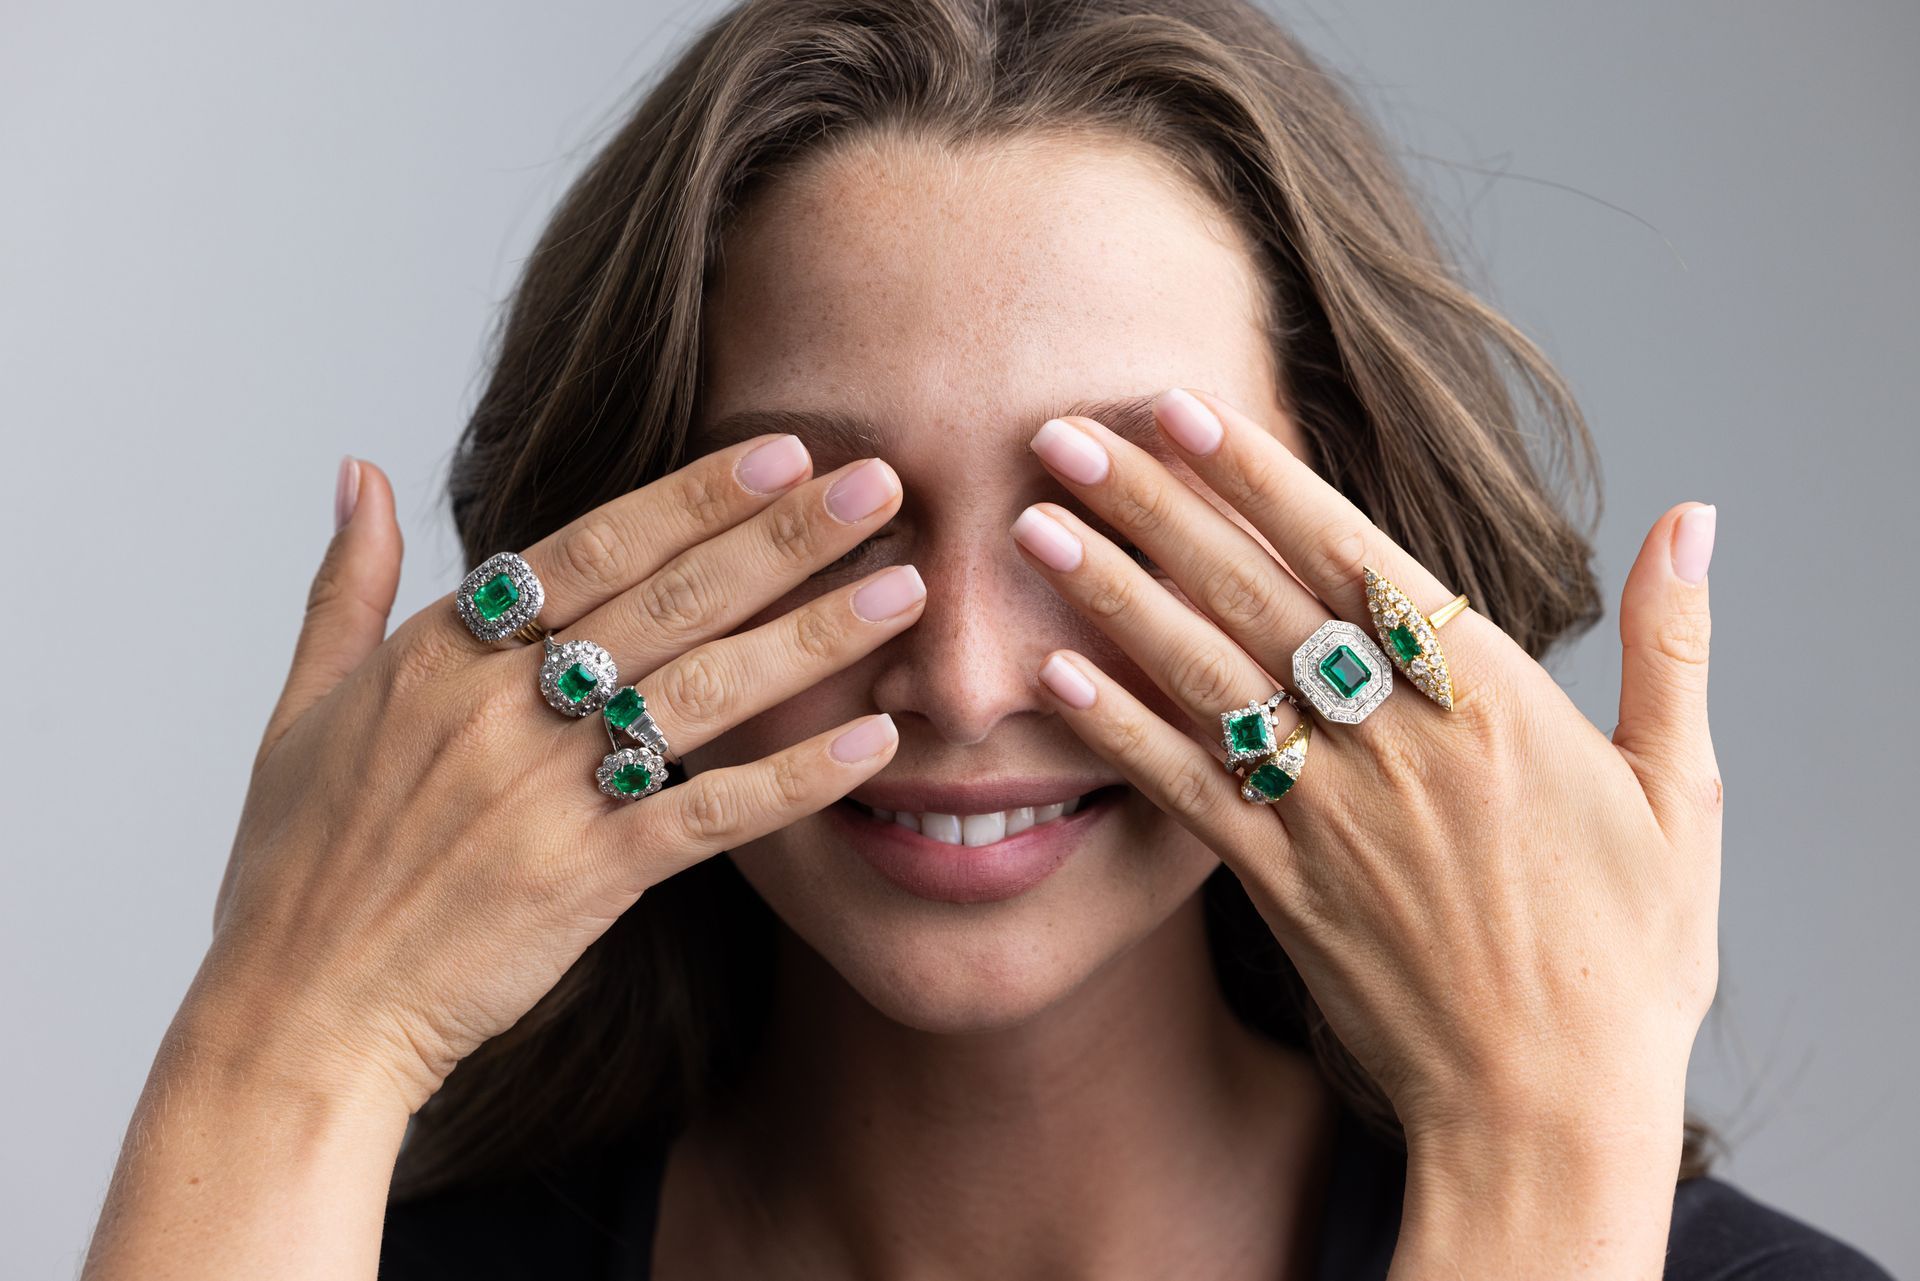 a woman is covering her eyes with her hands wearing rings .